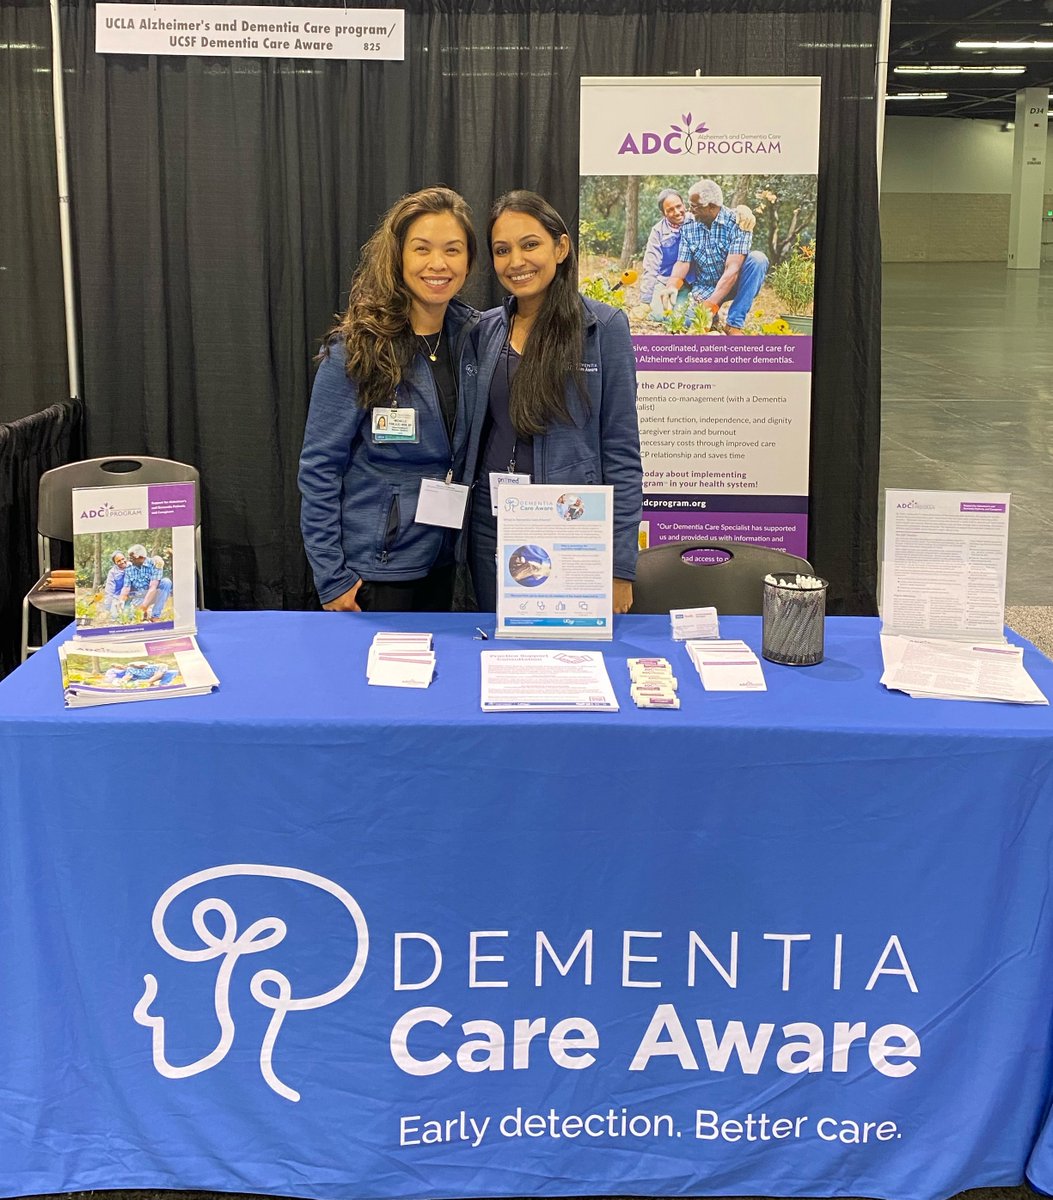 @mpanlilioUCLA and Jagrup K. are at @PriMedCME, Booth 825. Come learn more about #TheADCProgram and other UCLA key offerings in partnership with @UCSFGeriatrics's #DementiaCareAware